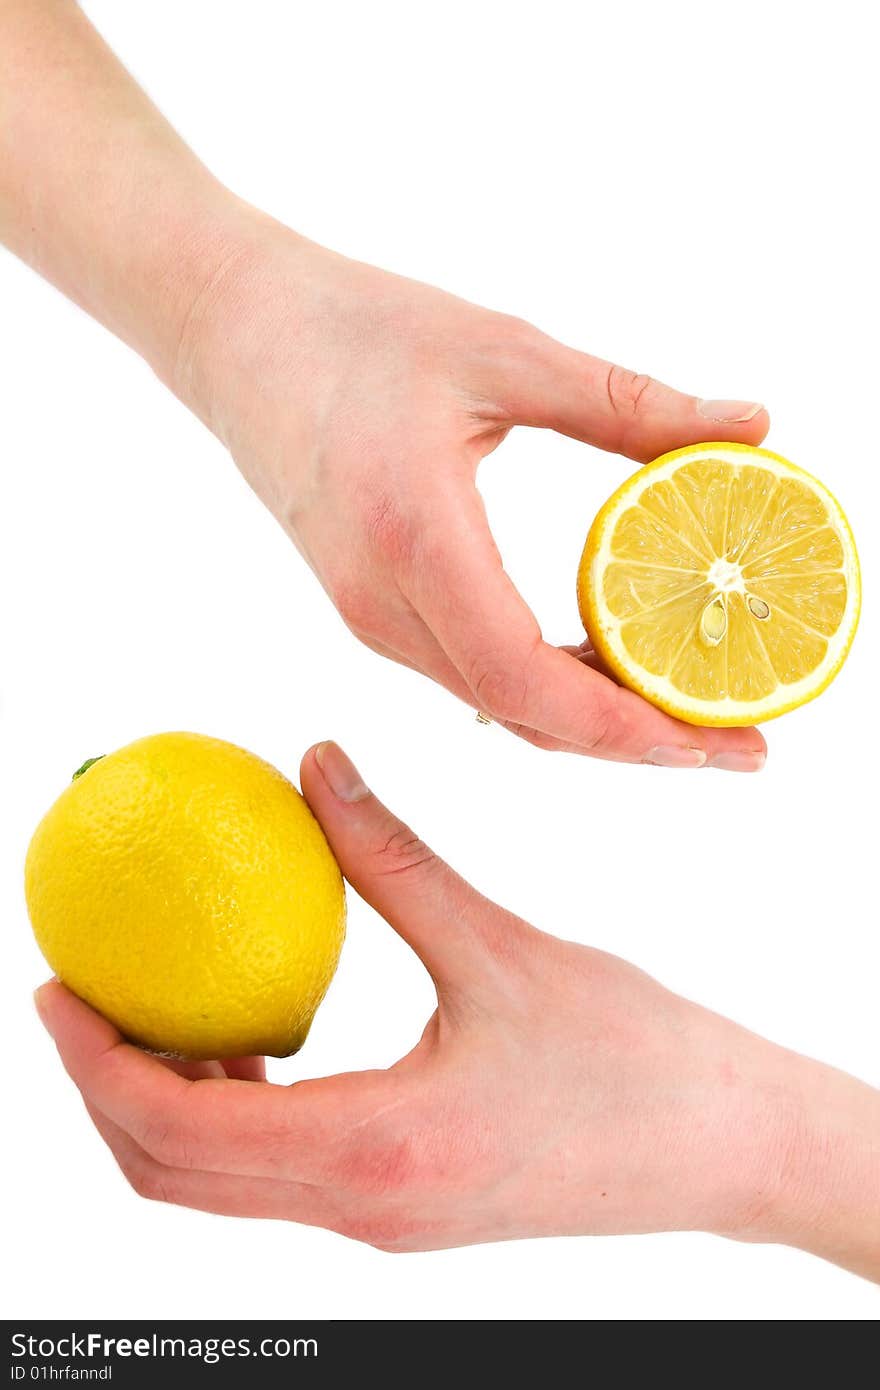 Woman's hands holding citrus fruits (lemon) isolated on a white background